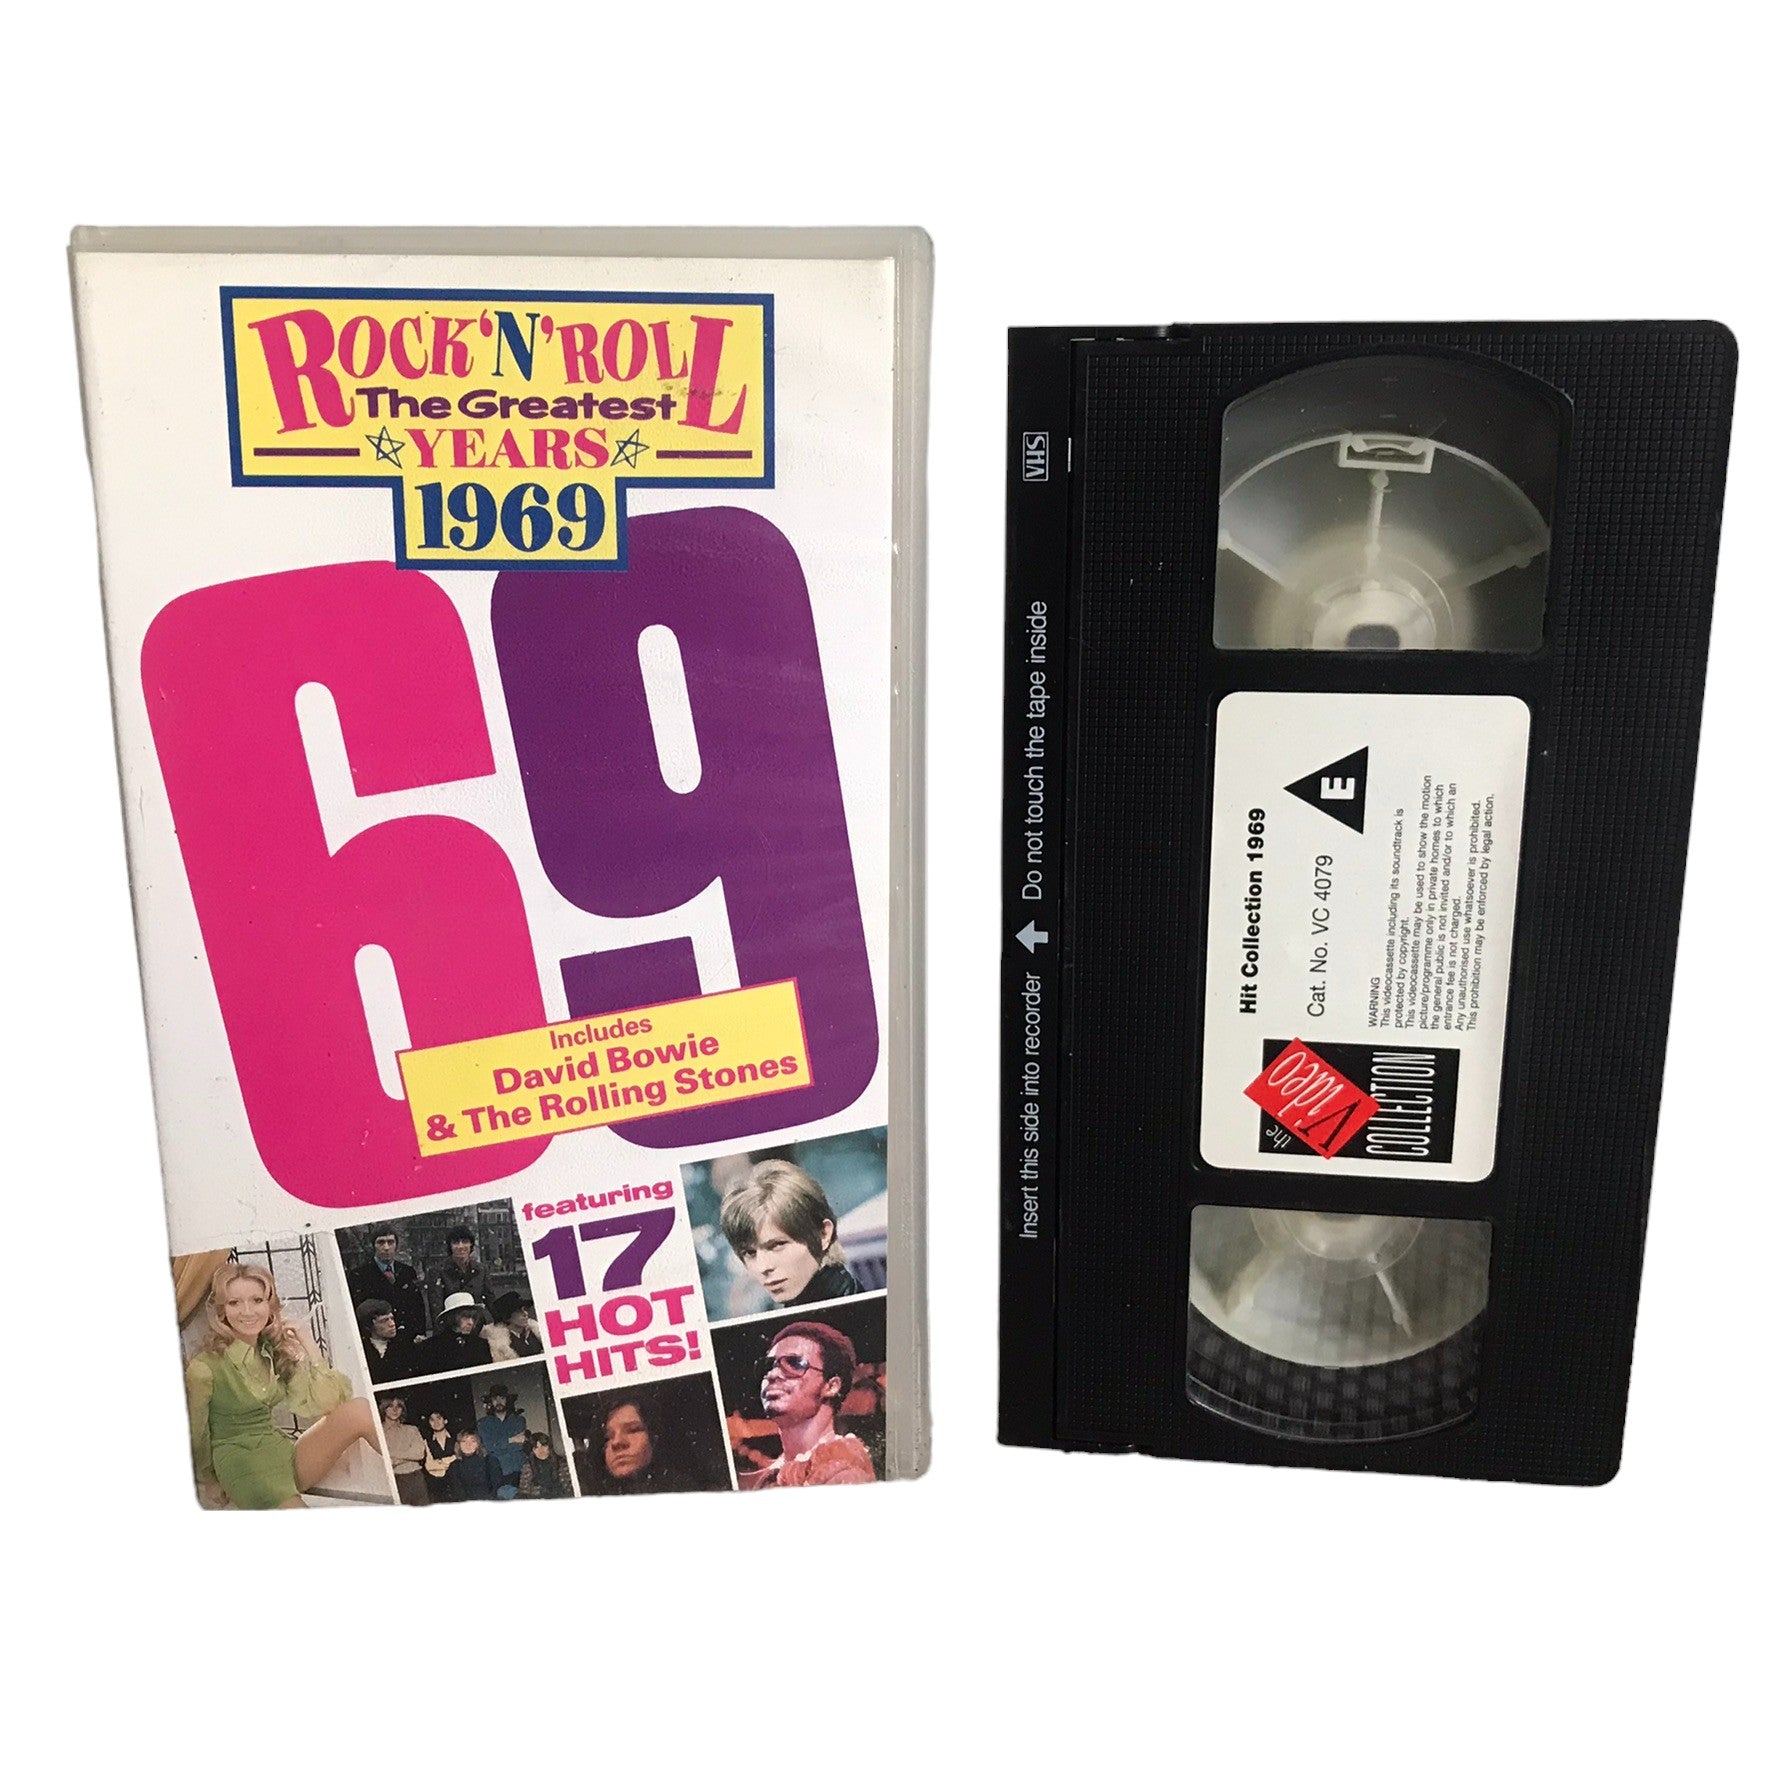 Rock N Roll The Greatest Years 1969 - The Video Collection - Music - Pal -  VHS